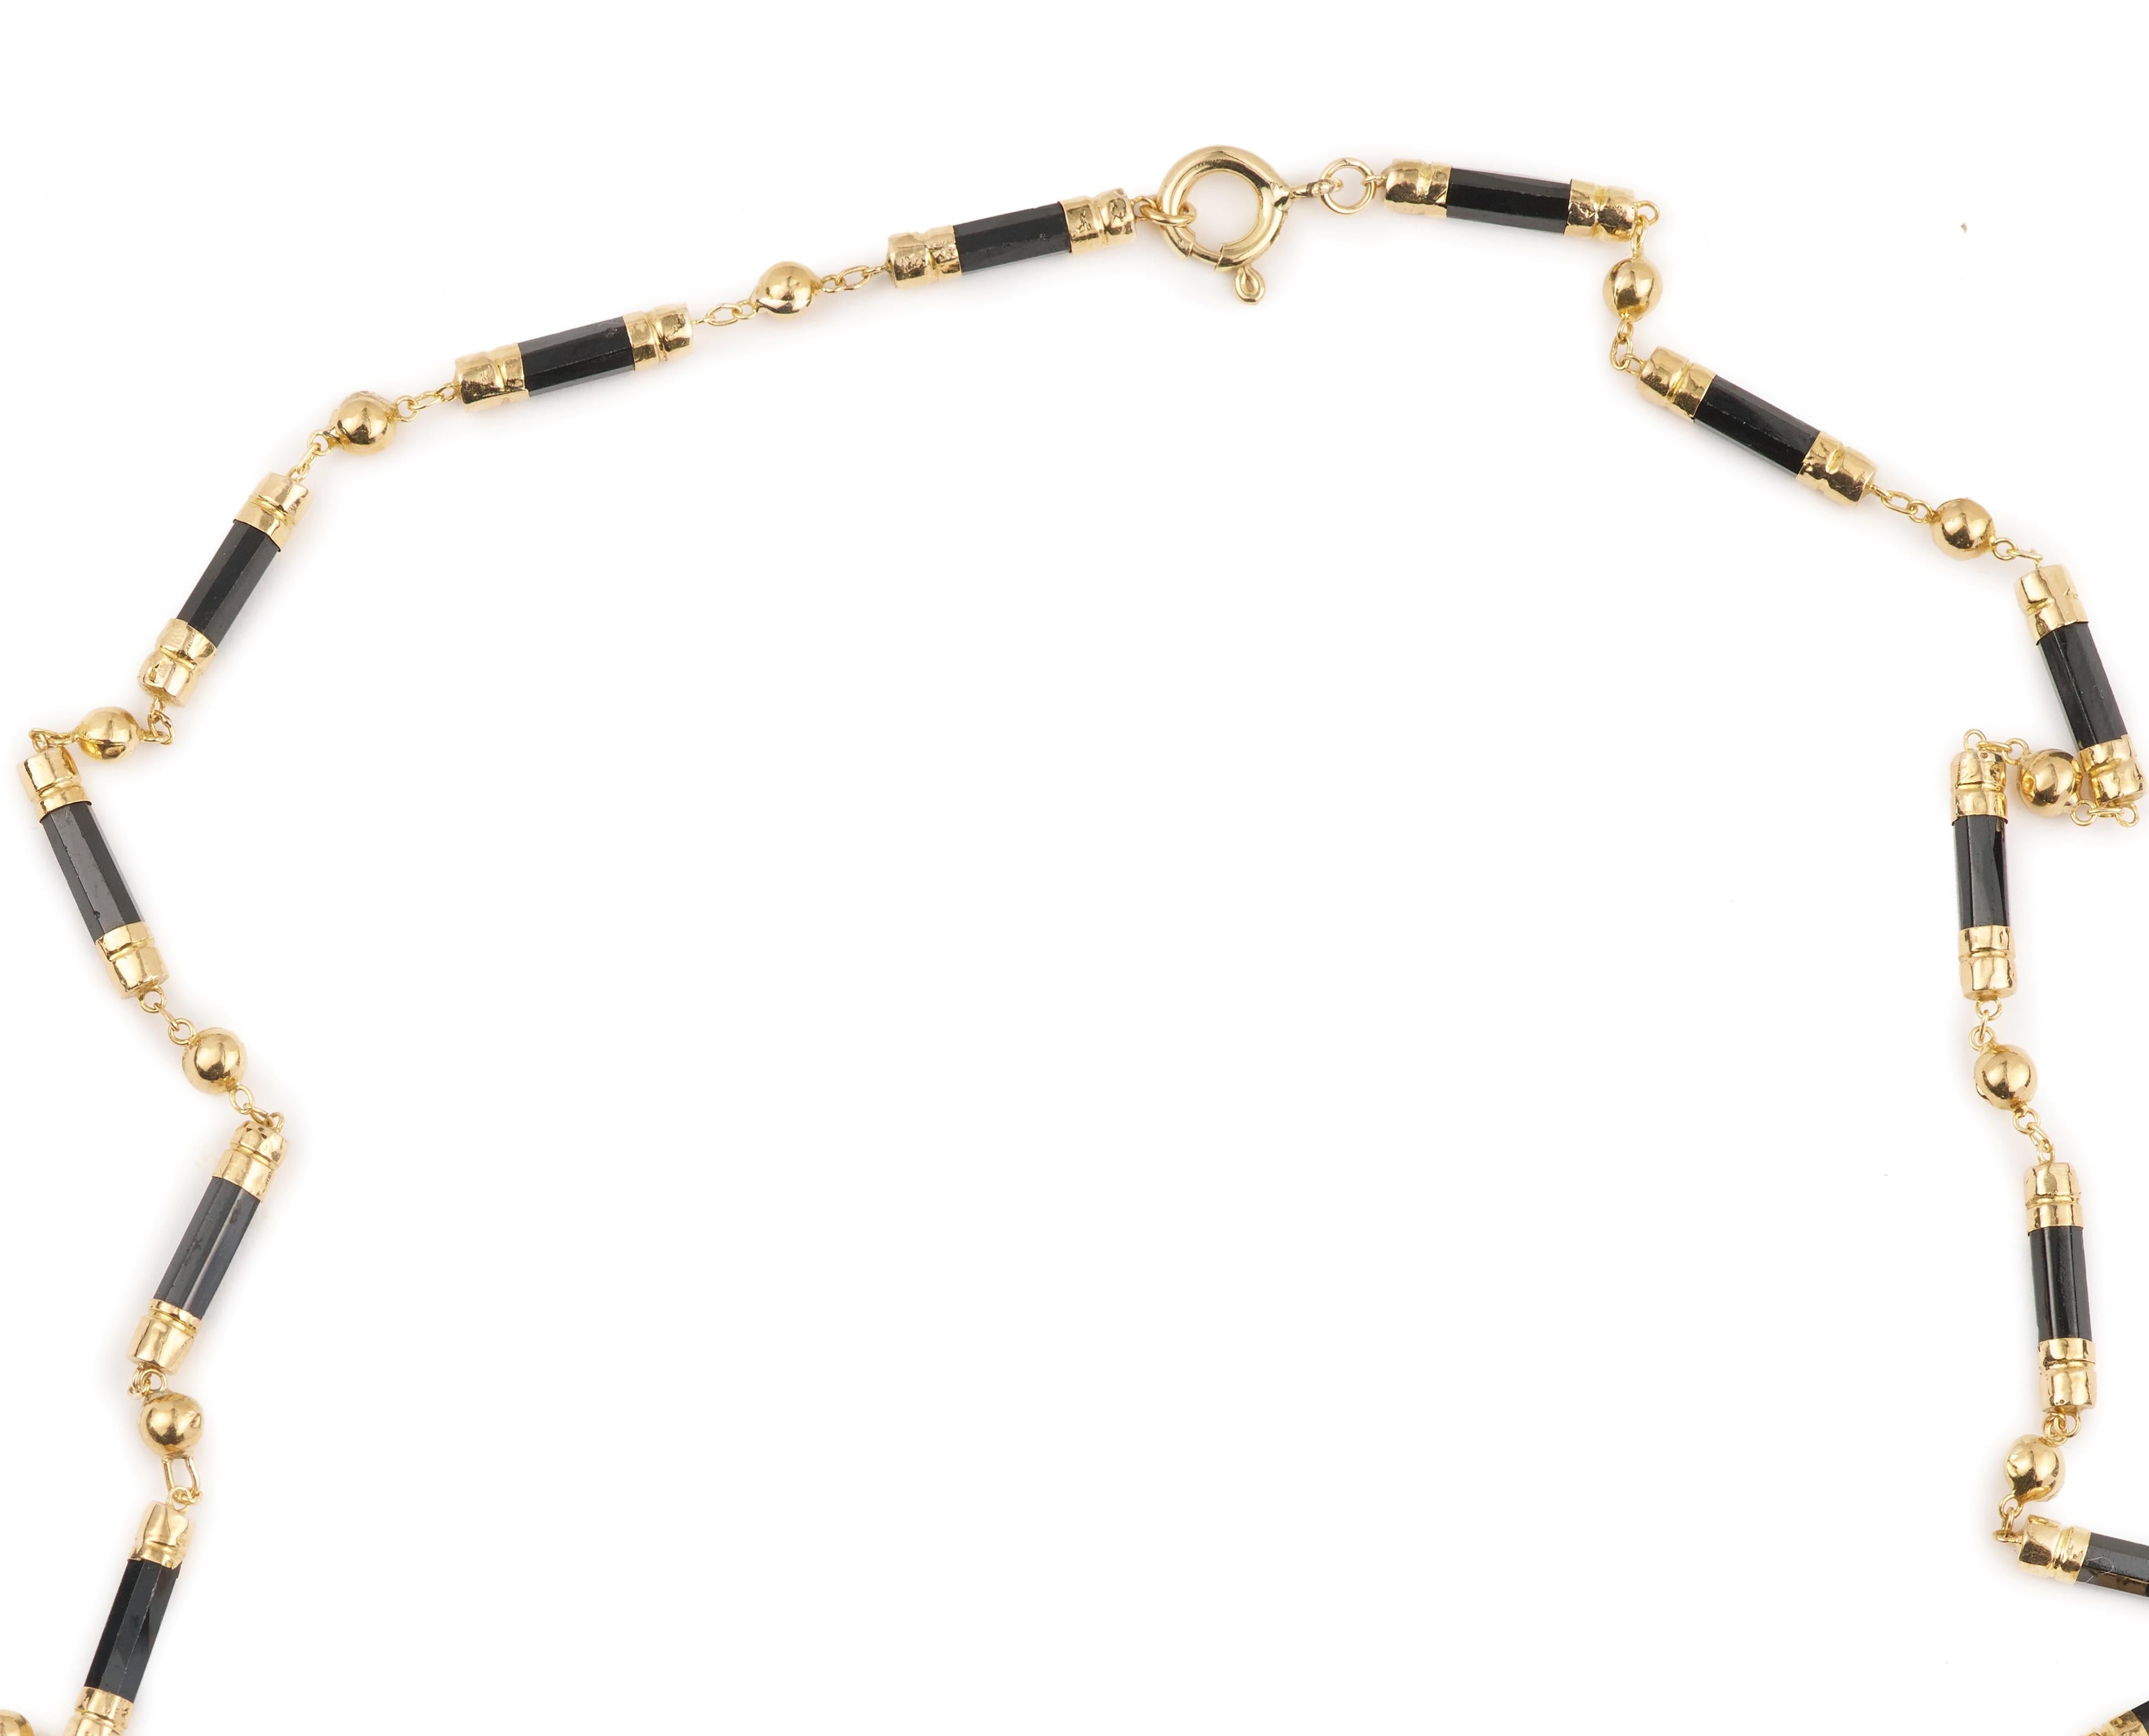 Elegant necklace / long necklace made of onyx cylinders, gold cylinders and gold balls.

Necklace length: 61 cm (24 inches)

18 carat yellow gold clasp

18 carat yellow gold, 750/1000

Weight 13.60 gr

French Work circa 1980